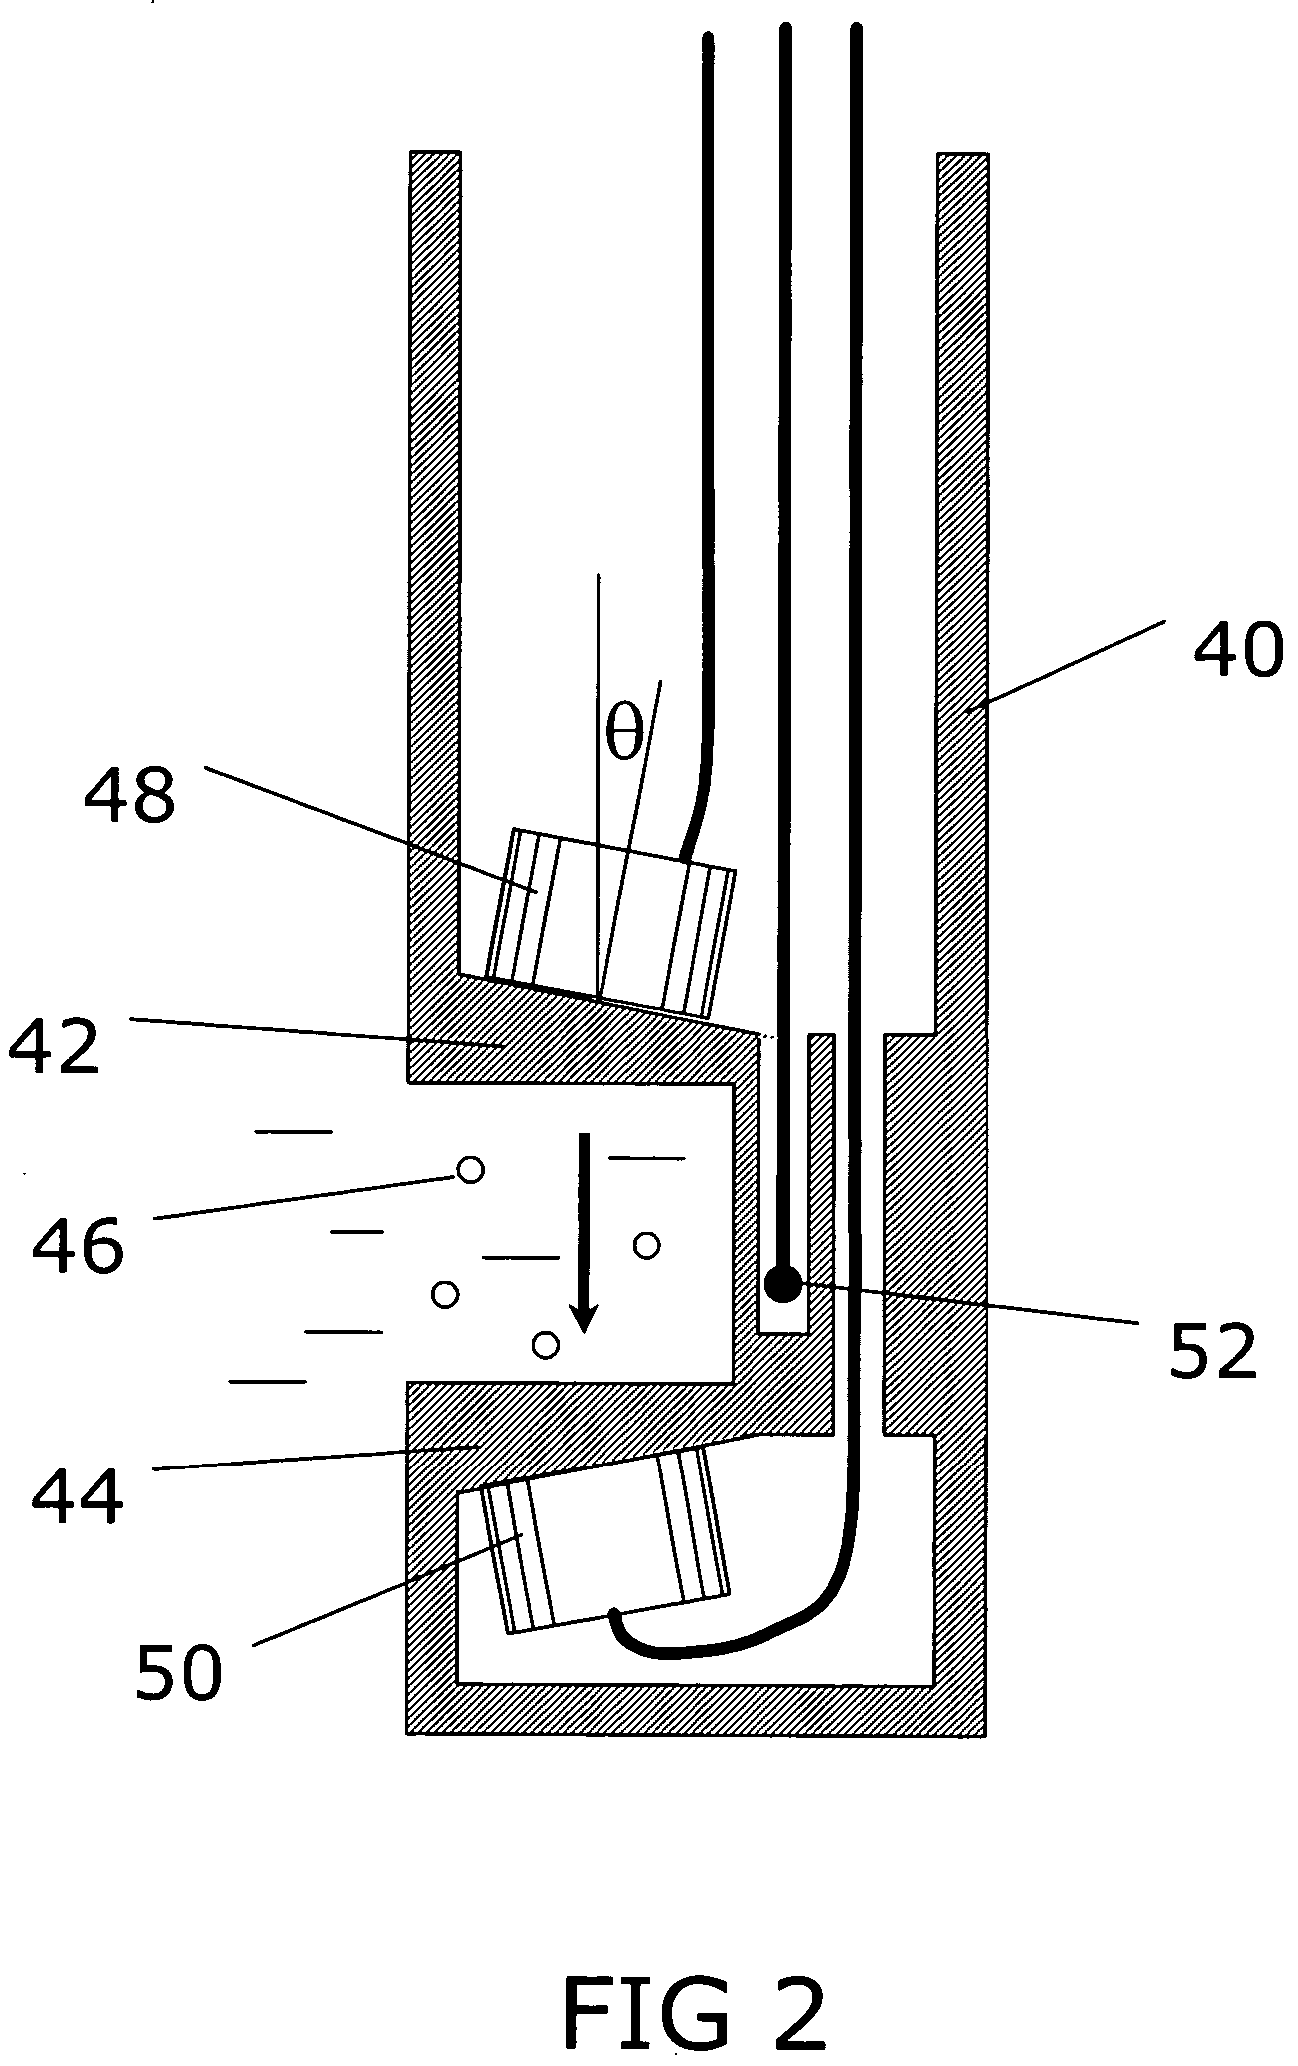 Ultrasonic monitor of material composition and particle size